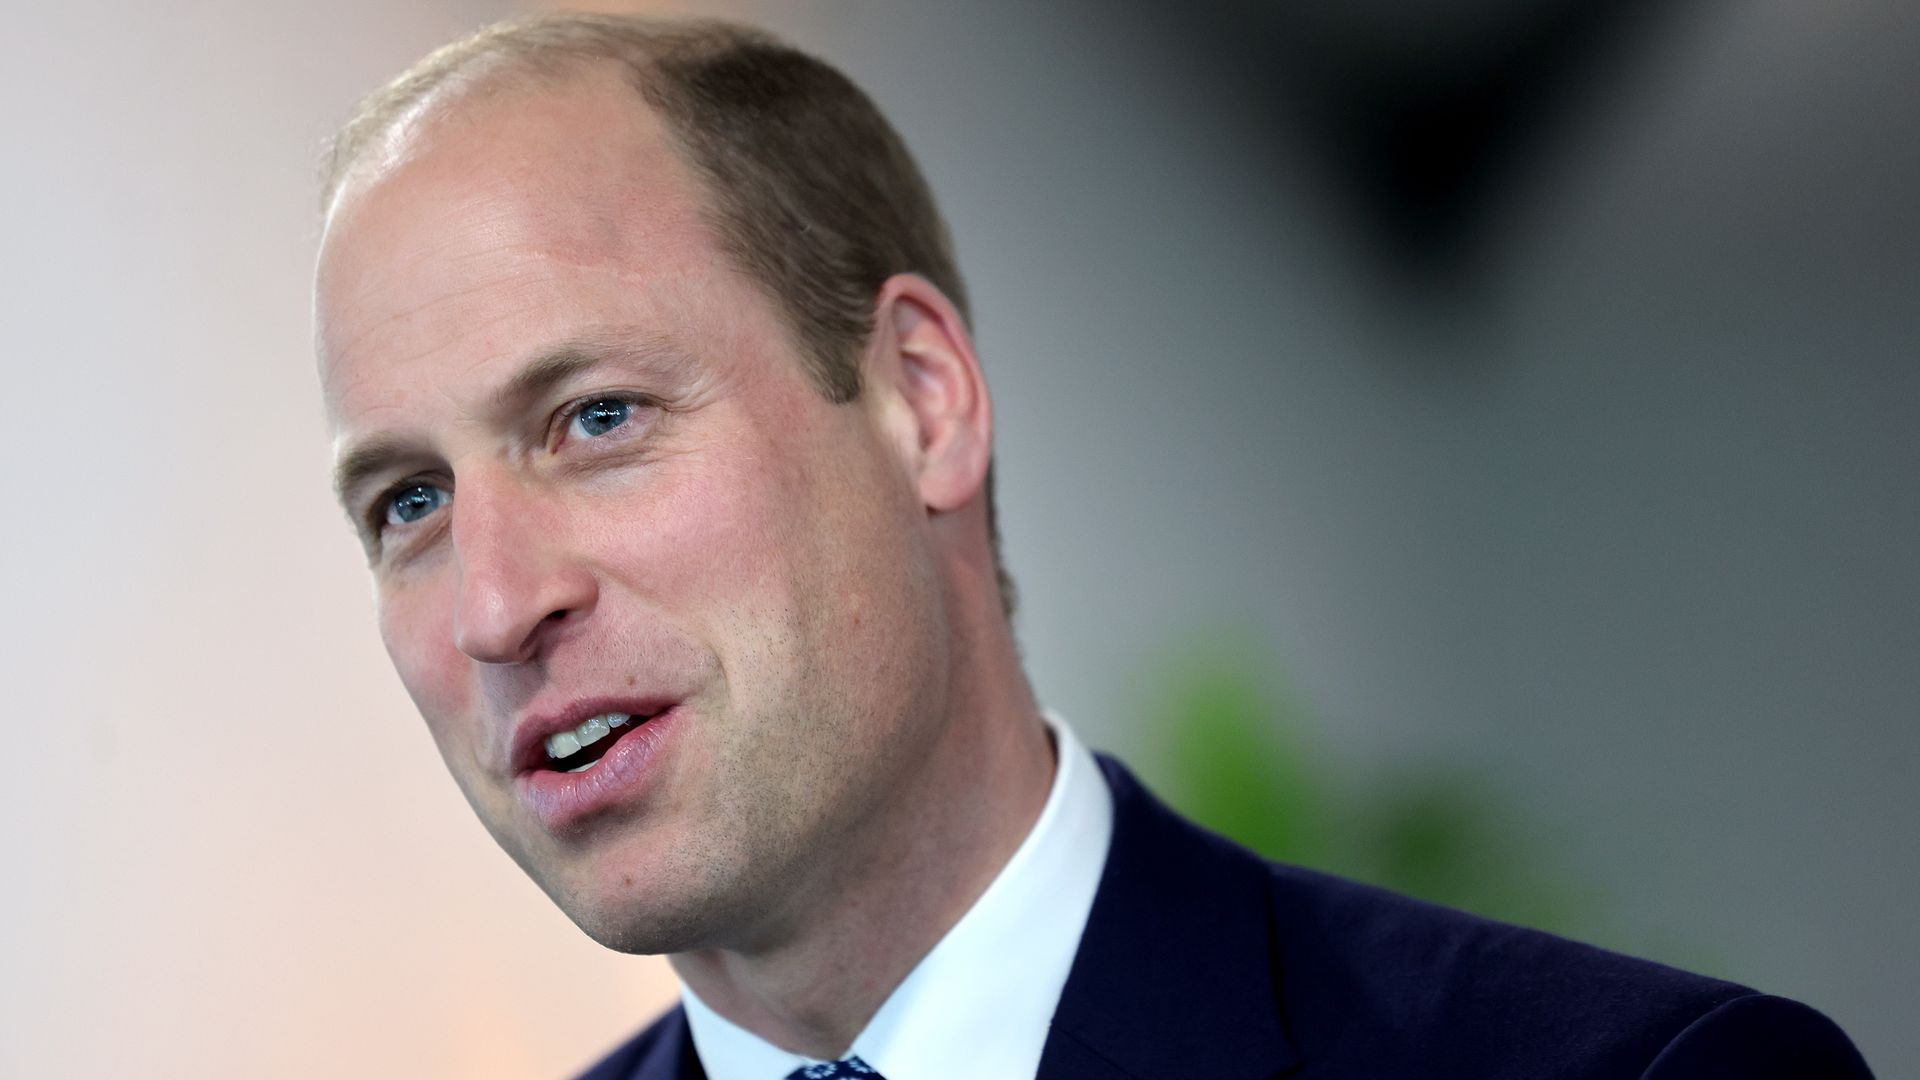 Prince William wearing a tie made from plastic bottles